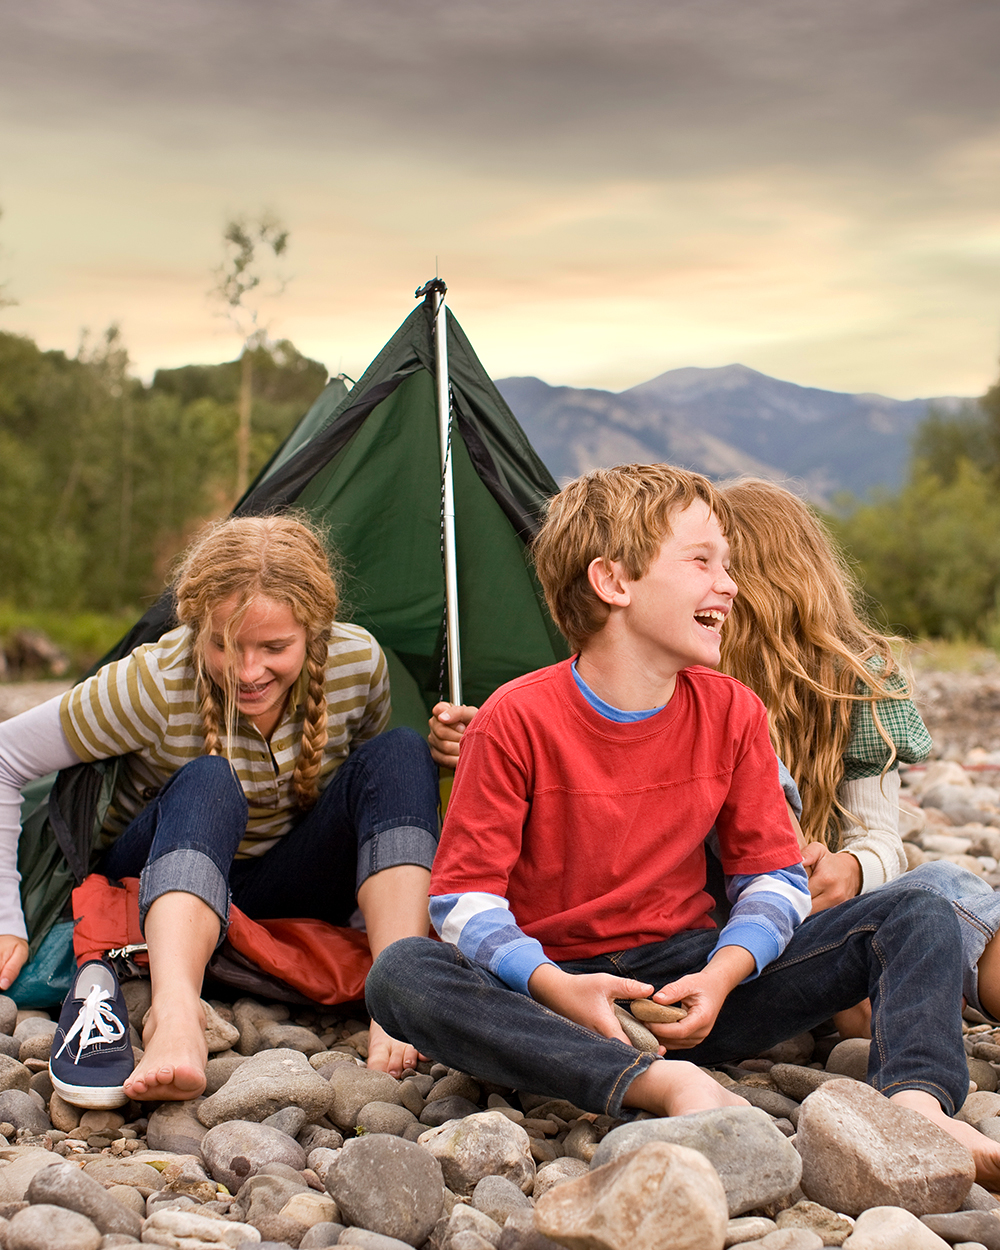 Brother and sisters playing outdoors around small pup tent along a creek